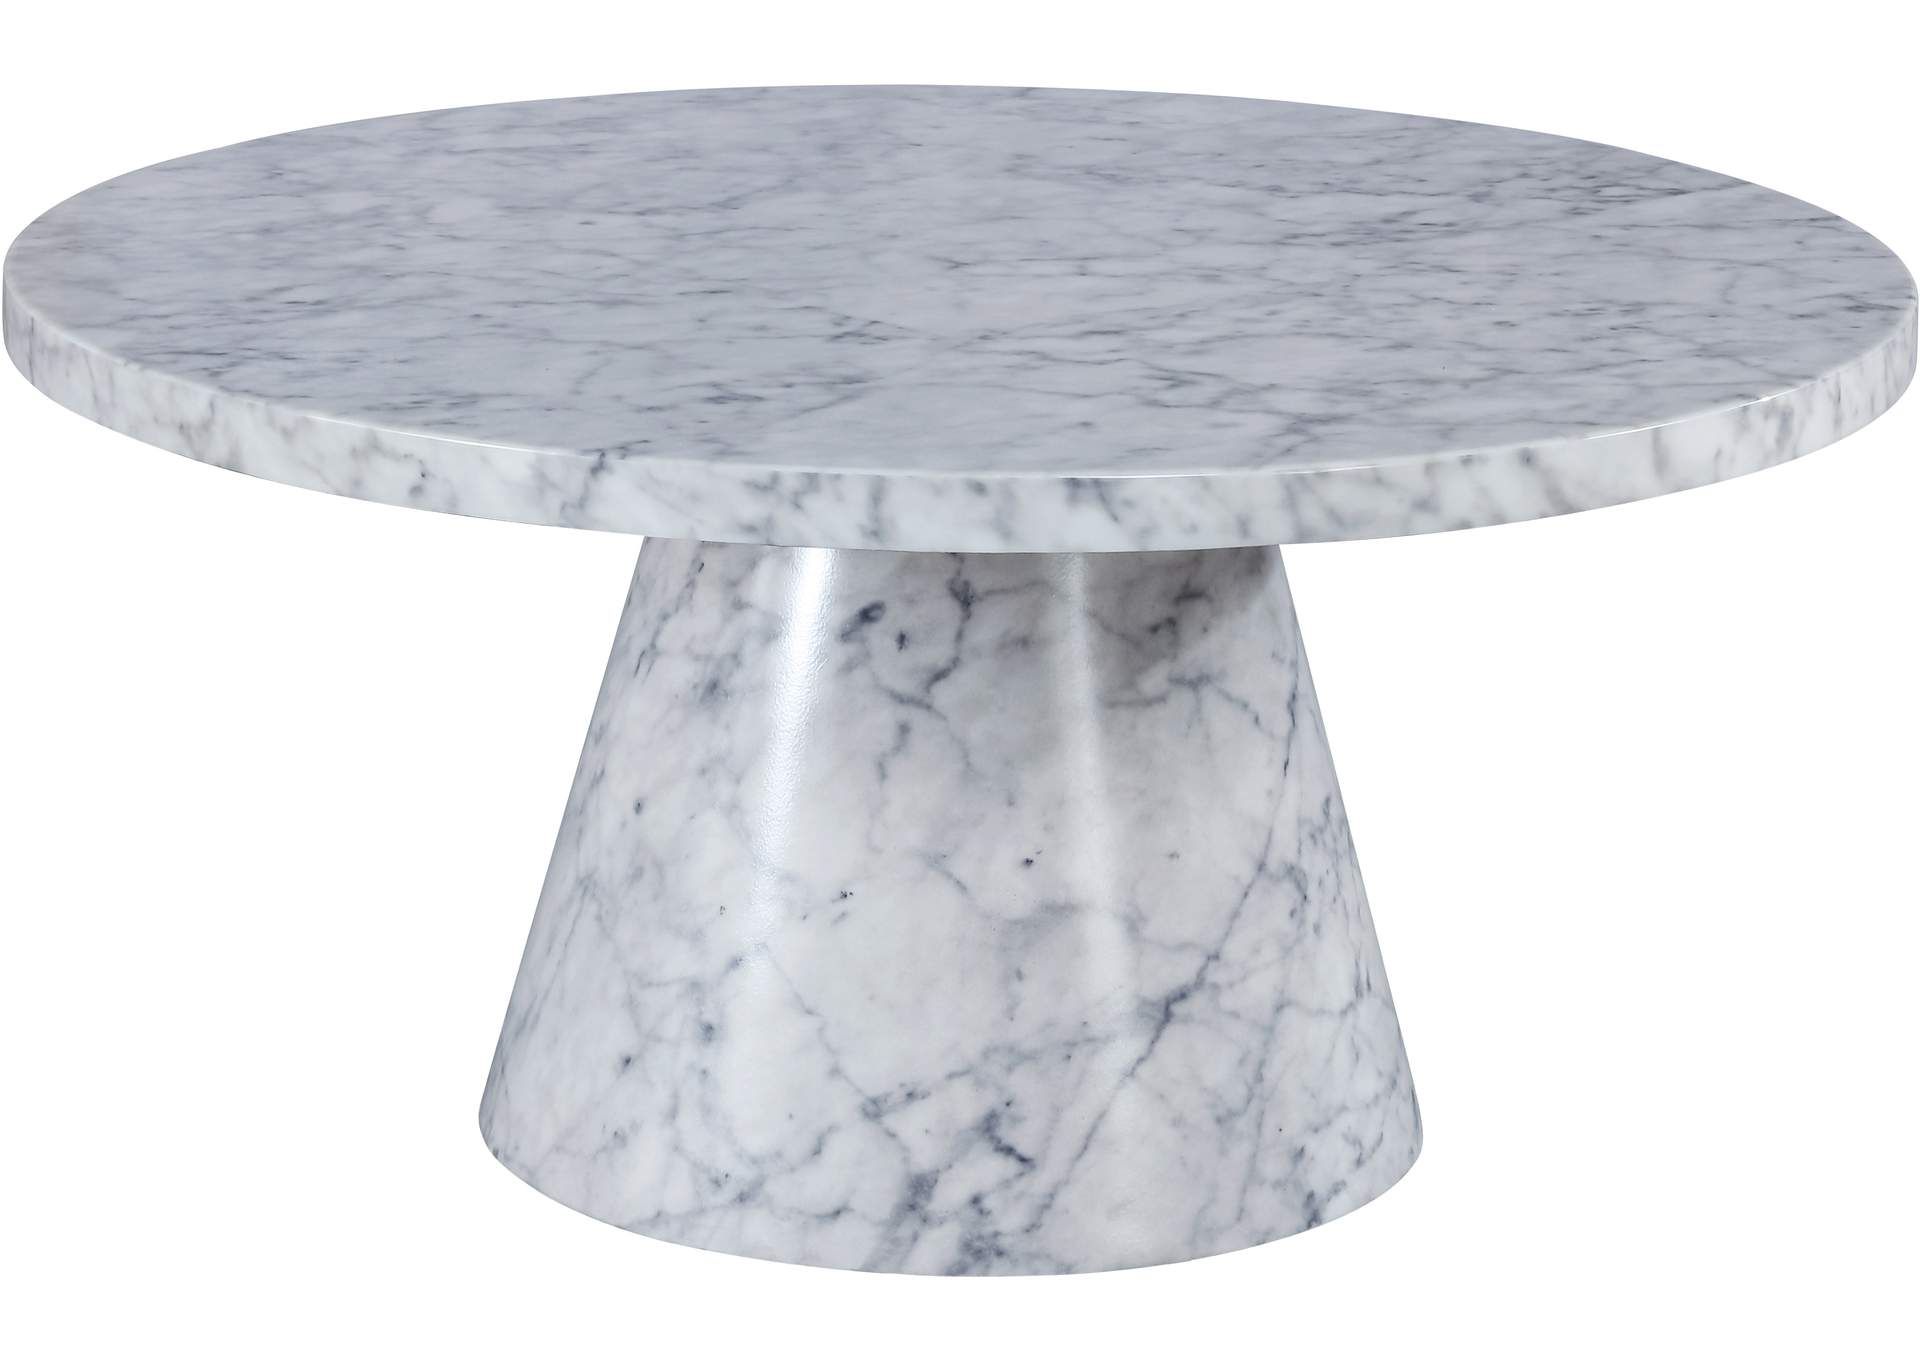 Omni White Faux Marble Coffee Table Best Buy Furniture And Mattress With Regard To White Faux Marble Coffee Tables (View 9 of 20)